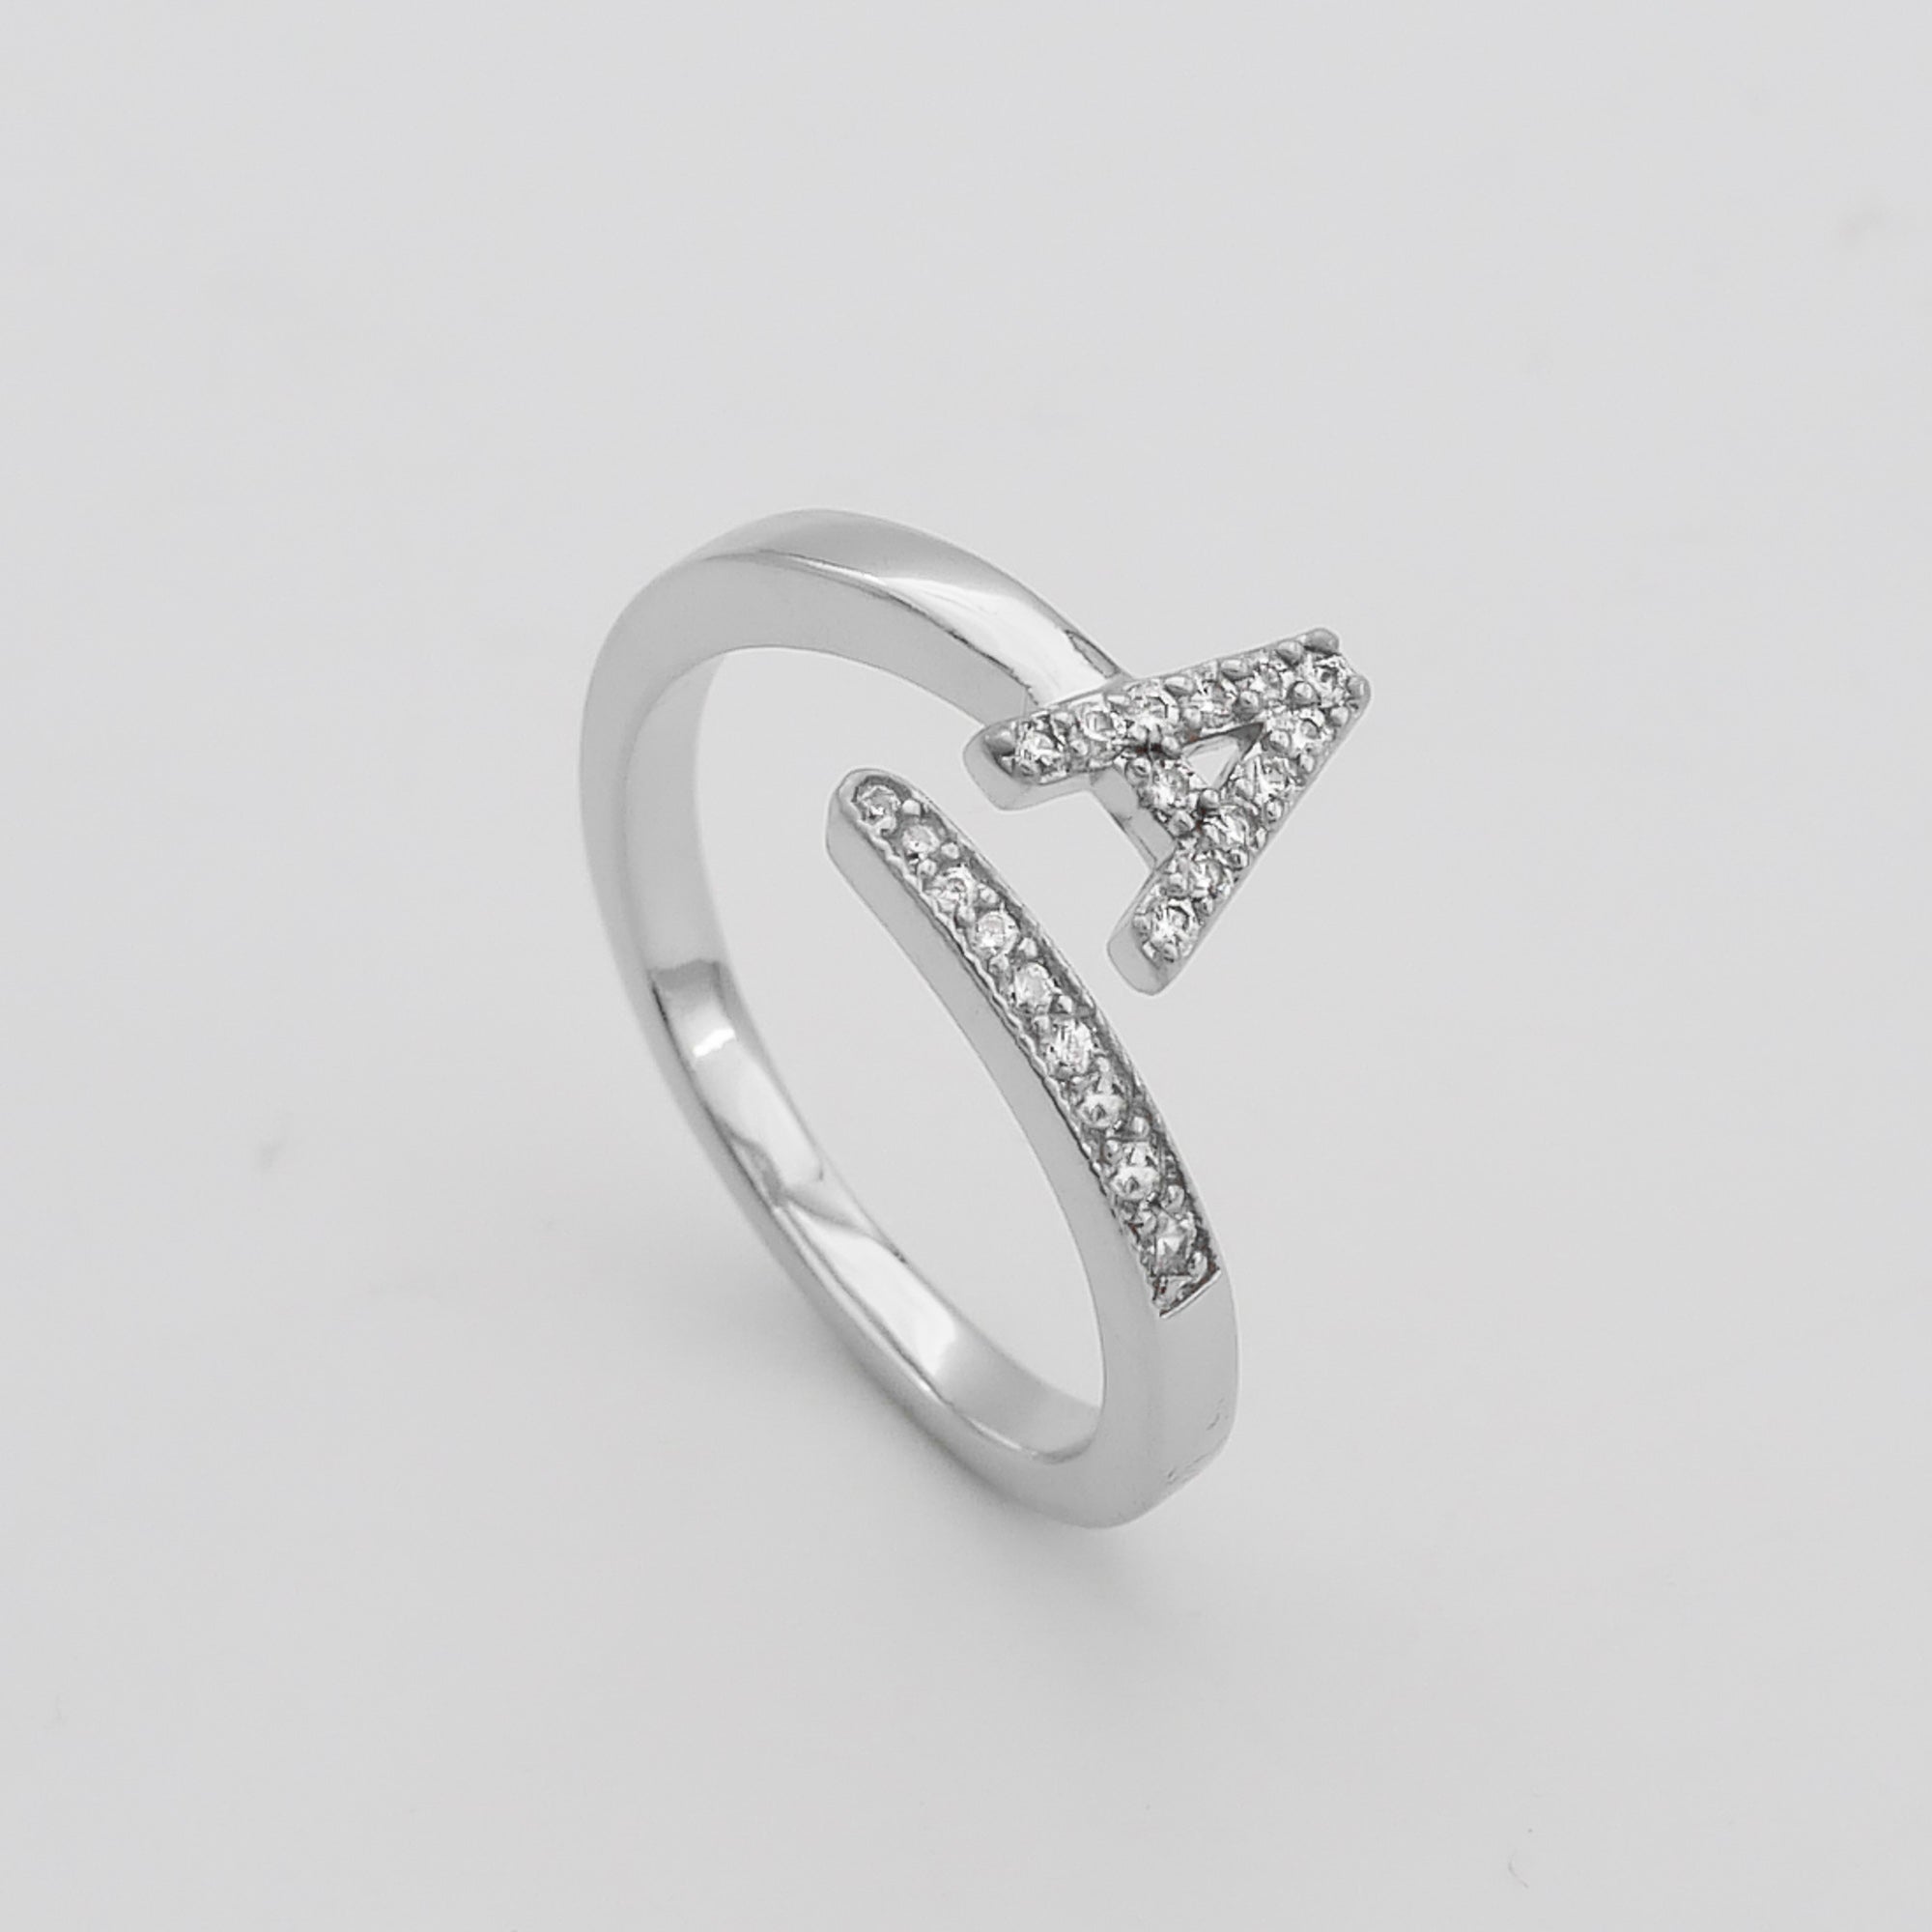 ICY Initial Ring